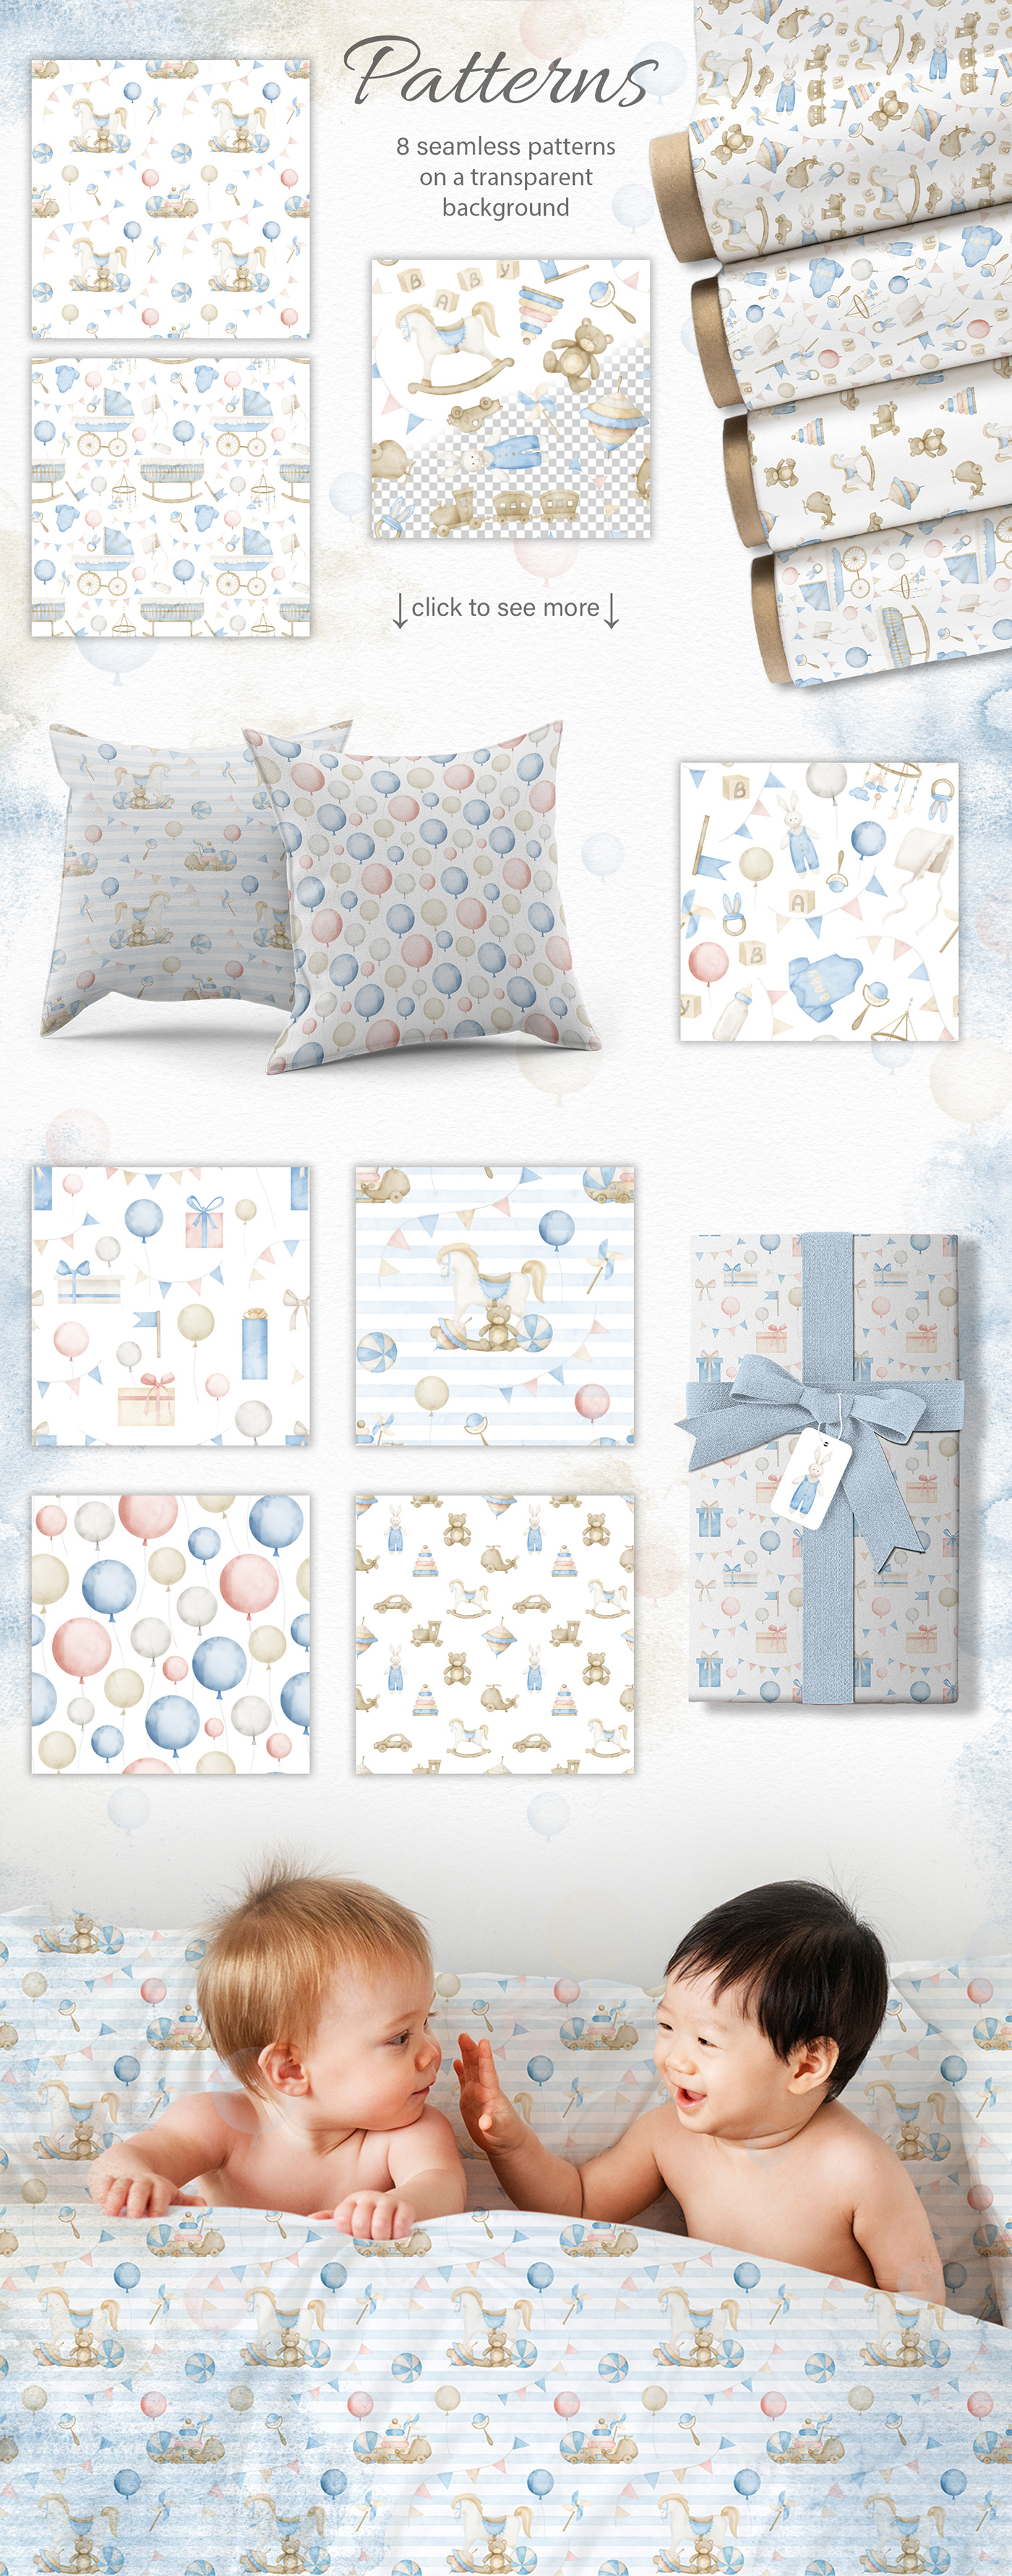 Baby seamless patterns with retro toys. Watercolor prints in pastel colors